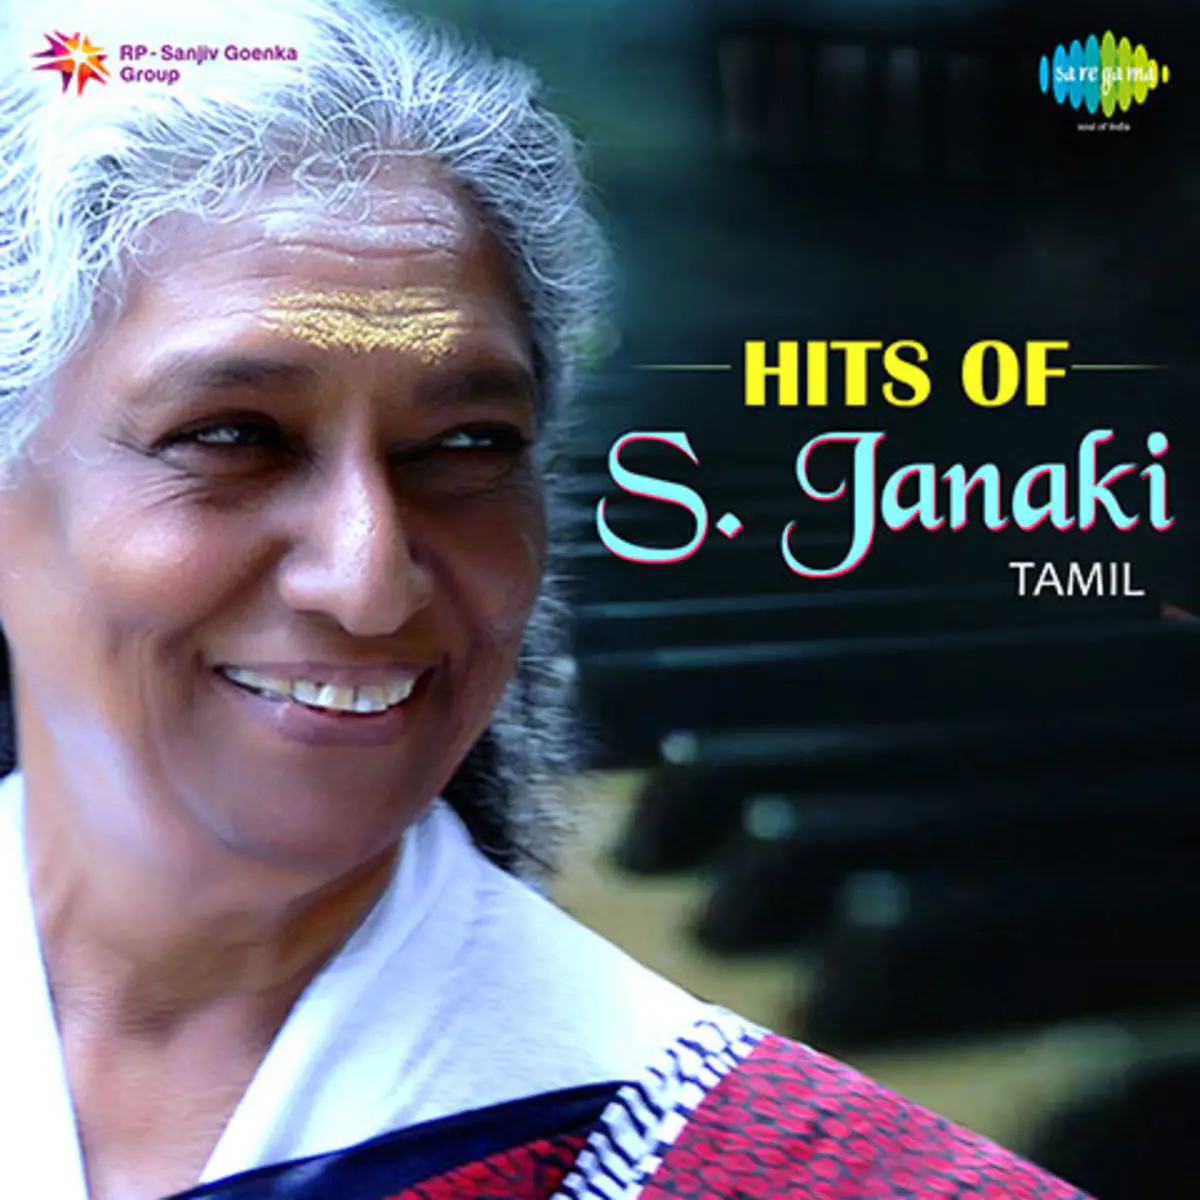 Hits Of S Janaki Tamil Songs Download Hits Of S Janaki Tamil Mp3 Tamil Songs Online Free On Gaana Com Internet archive html5 uploader 1.6.3. hits of s janaki tamil mp3 tamil songs